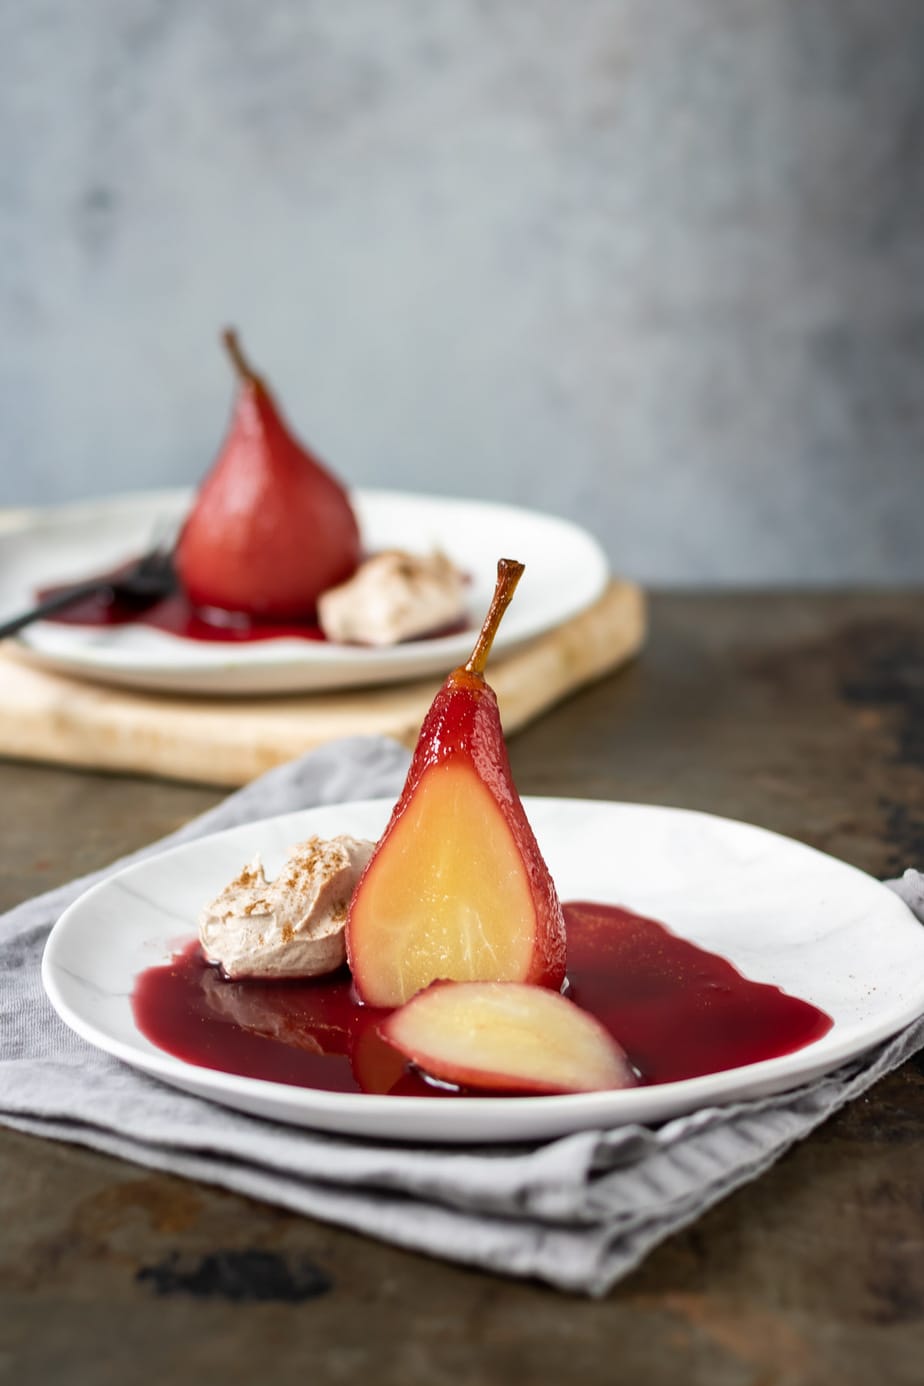 Poached pear on a plate with a slice cut out.